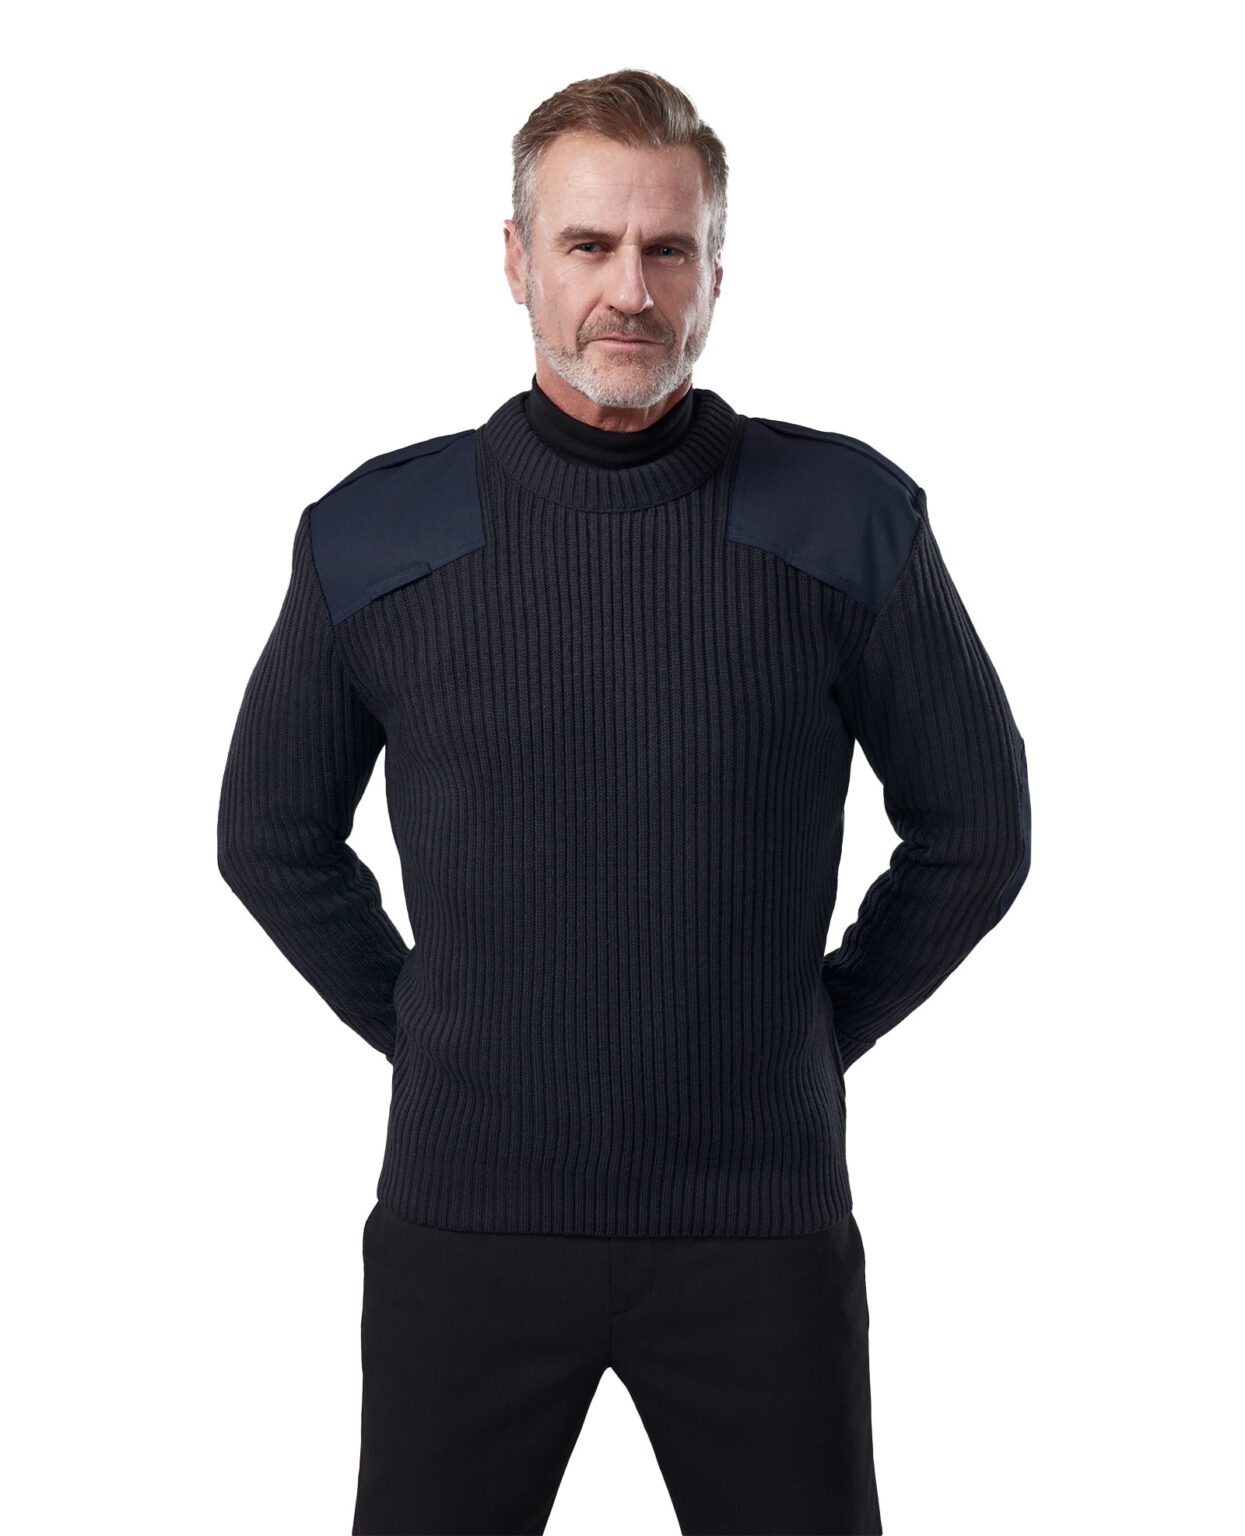 man in thick navy crew neck sweater with shoulder and elbow patches